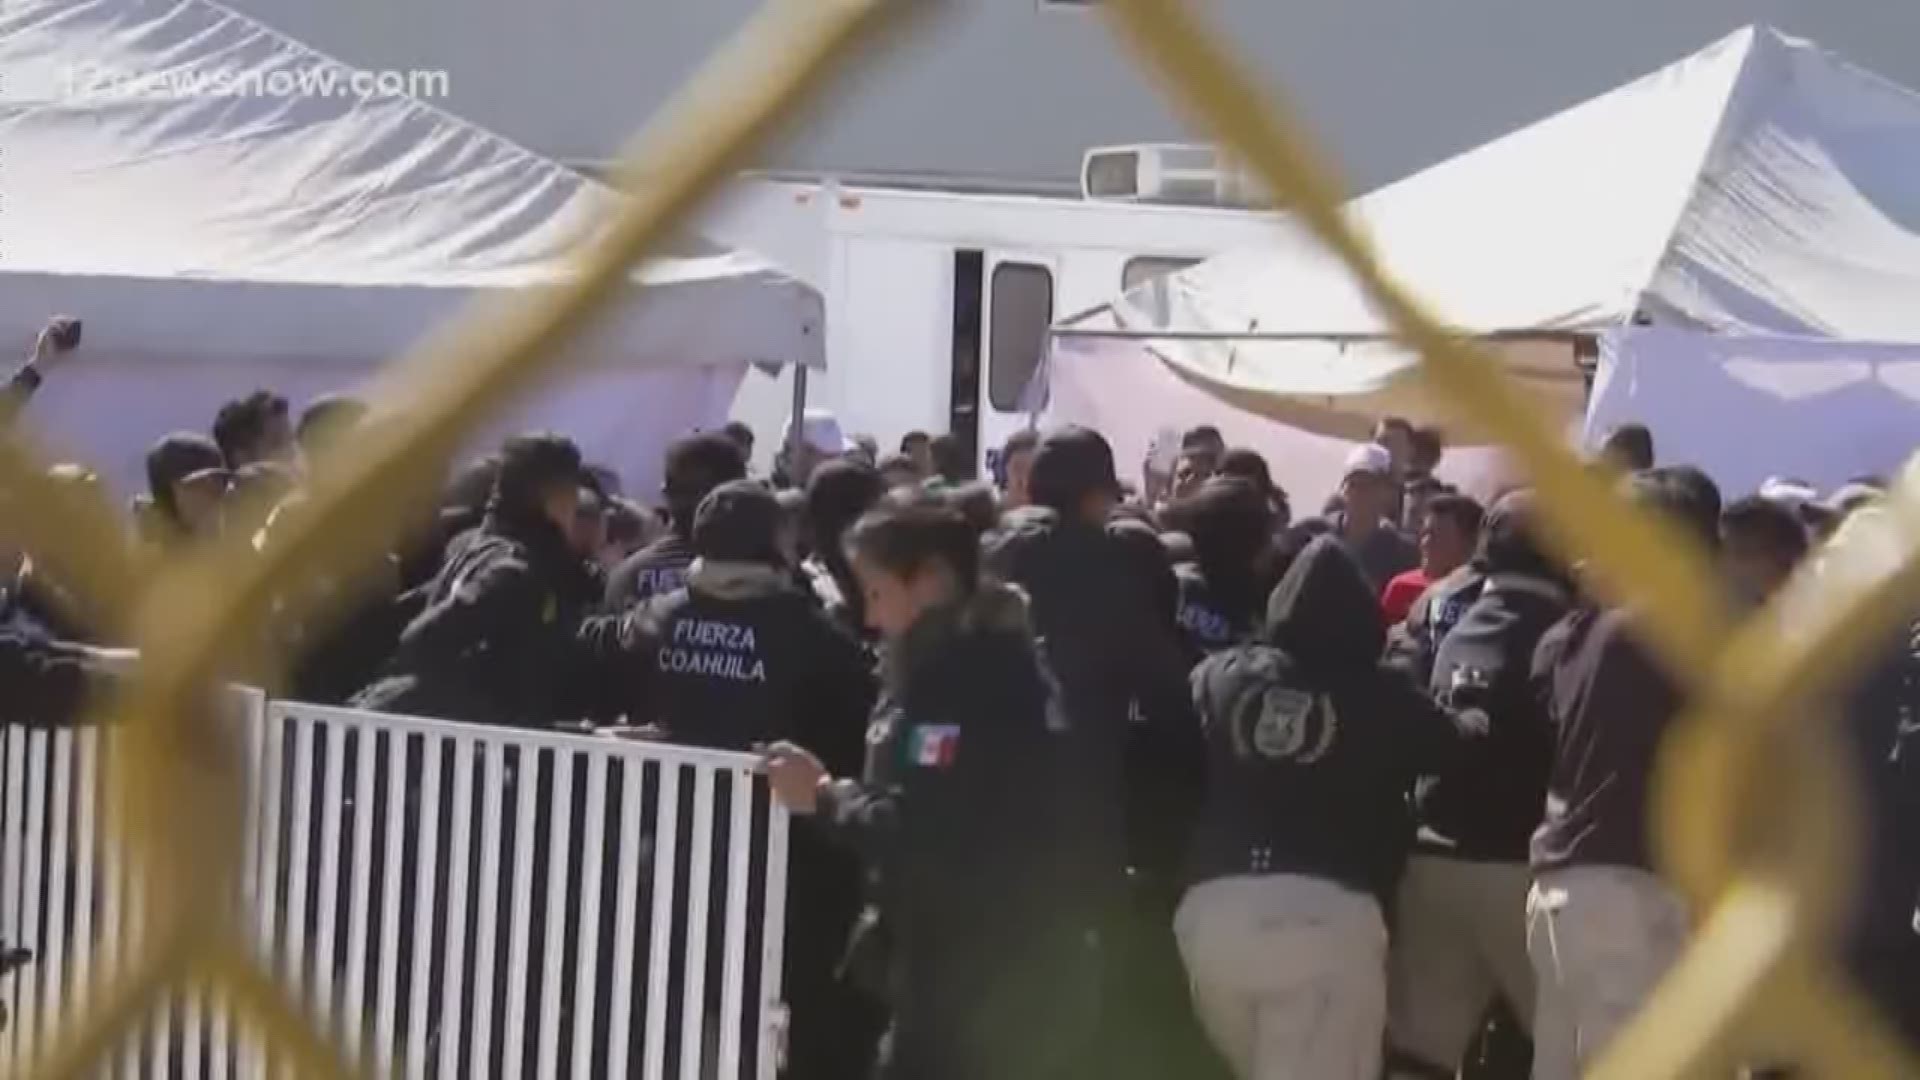 A large scene near Eagle Pass erupts as many migrants try to force their way past security barriers put up by Mecican authorities. There are no reported injuries.